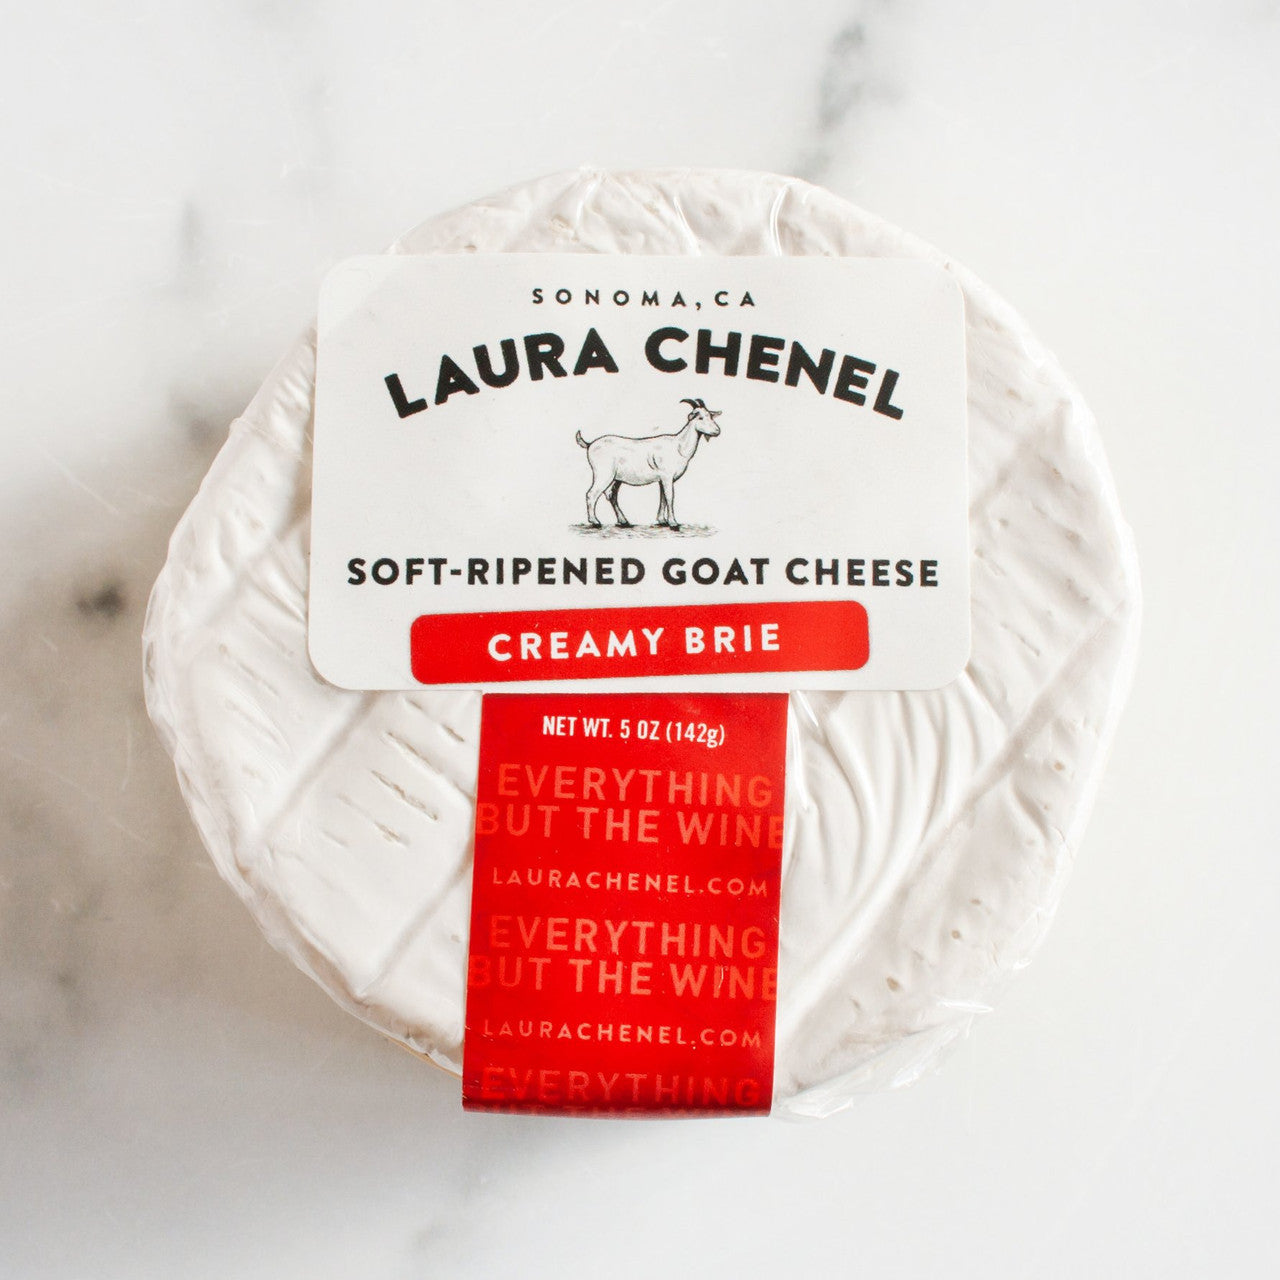 Laura Chenel Goat Cheese Creamy Brie